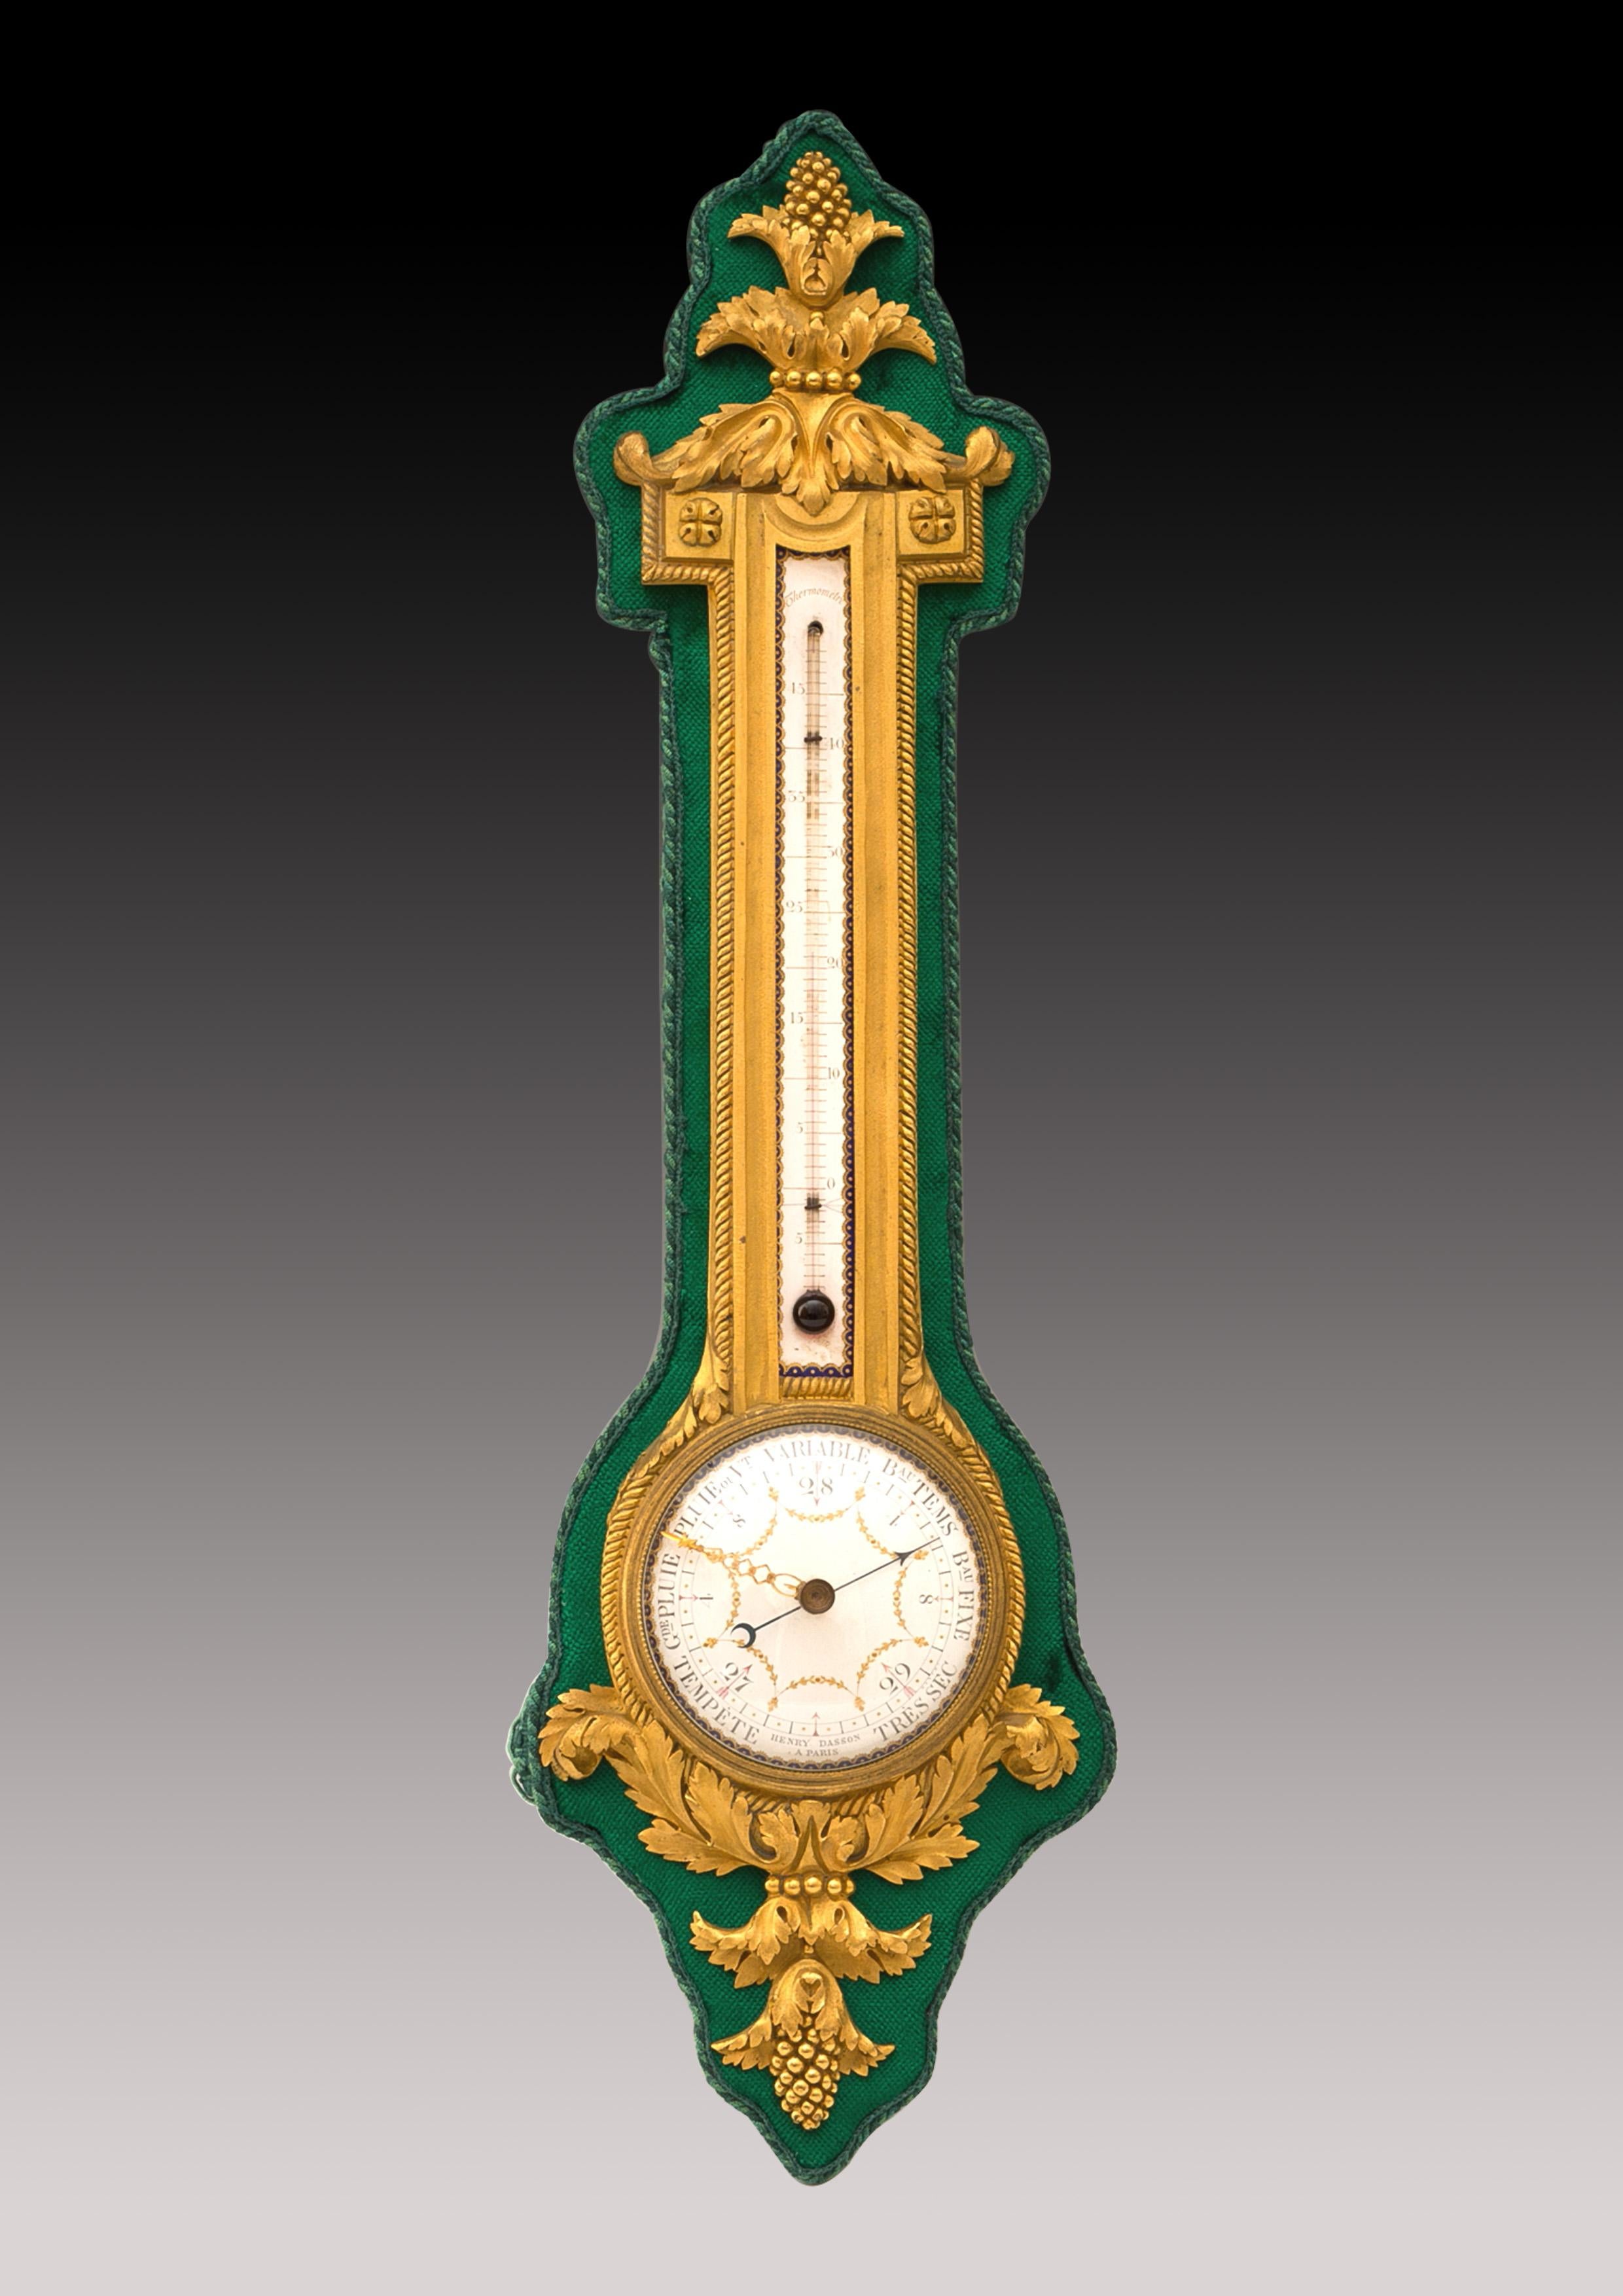 A companion pair of Louis XVI style barometer and thermometer finely decorated with gilt bronze acanthus leaves and seeds on green velvet, each with a polychrome decorated enamel plate, signed Henry Dasson / à Paris.

As a cabinet-maker and a